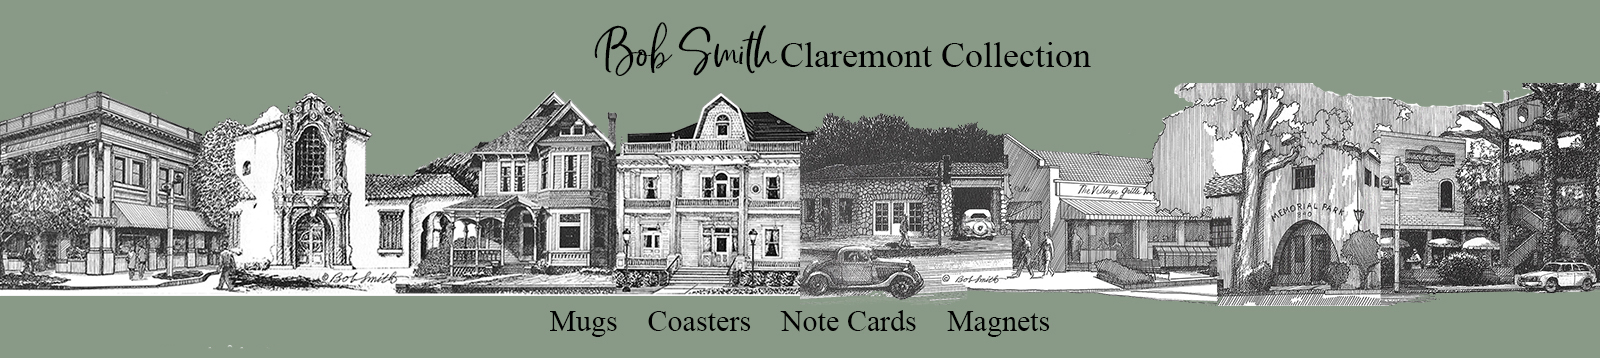 Bob Smith Claremont Collection